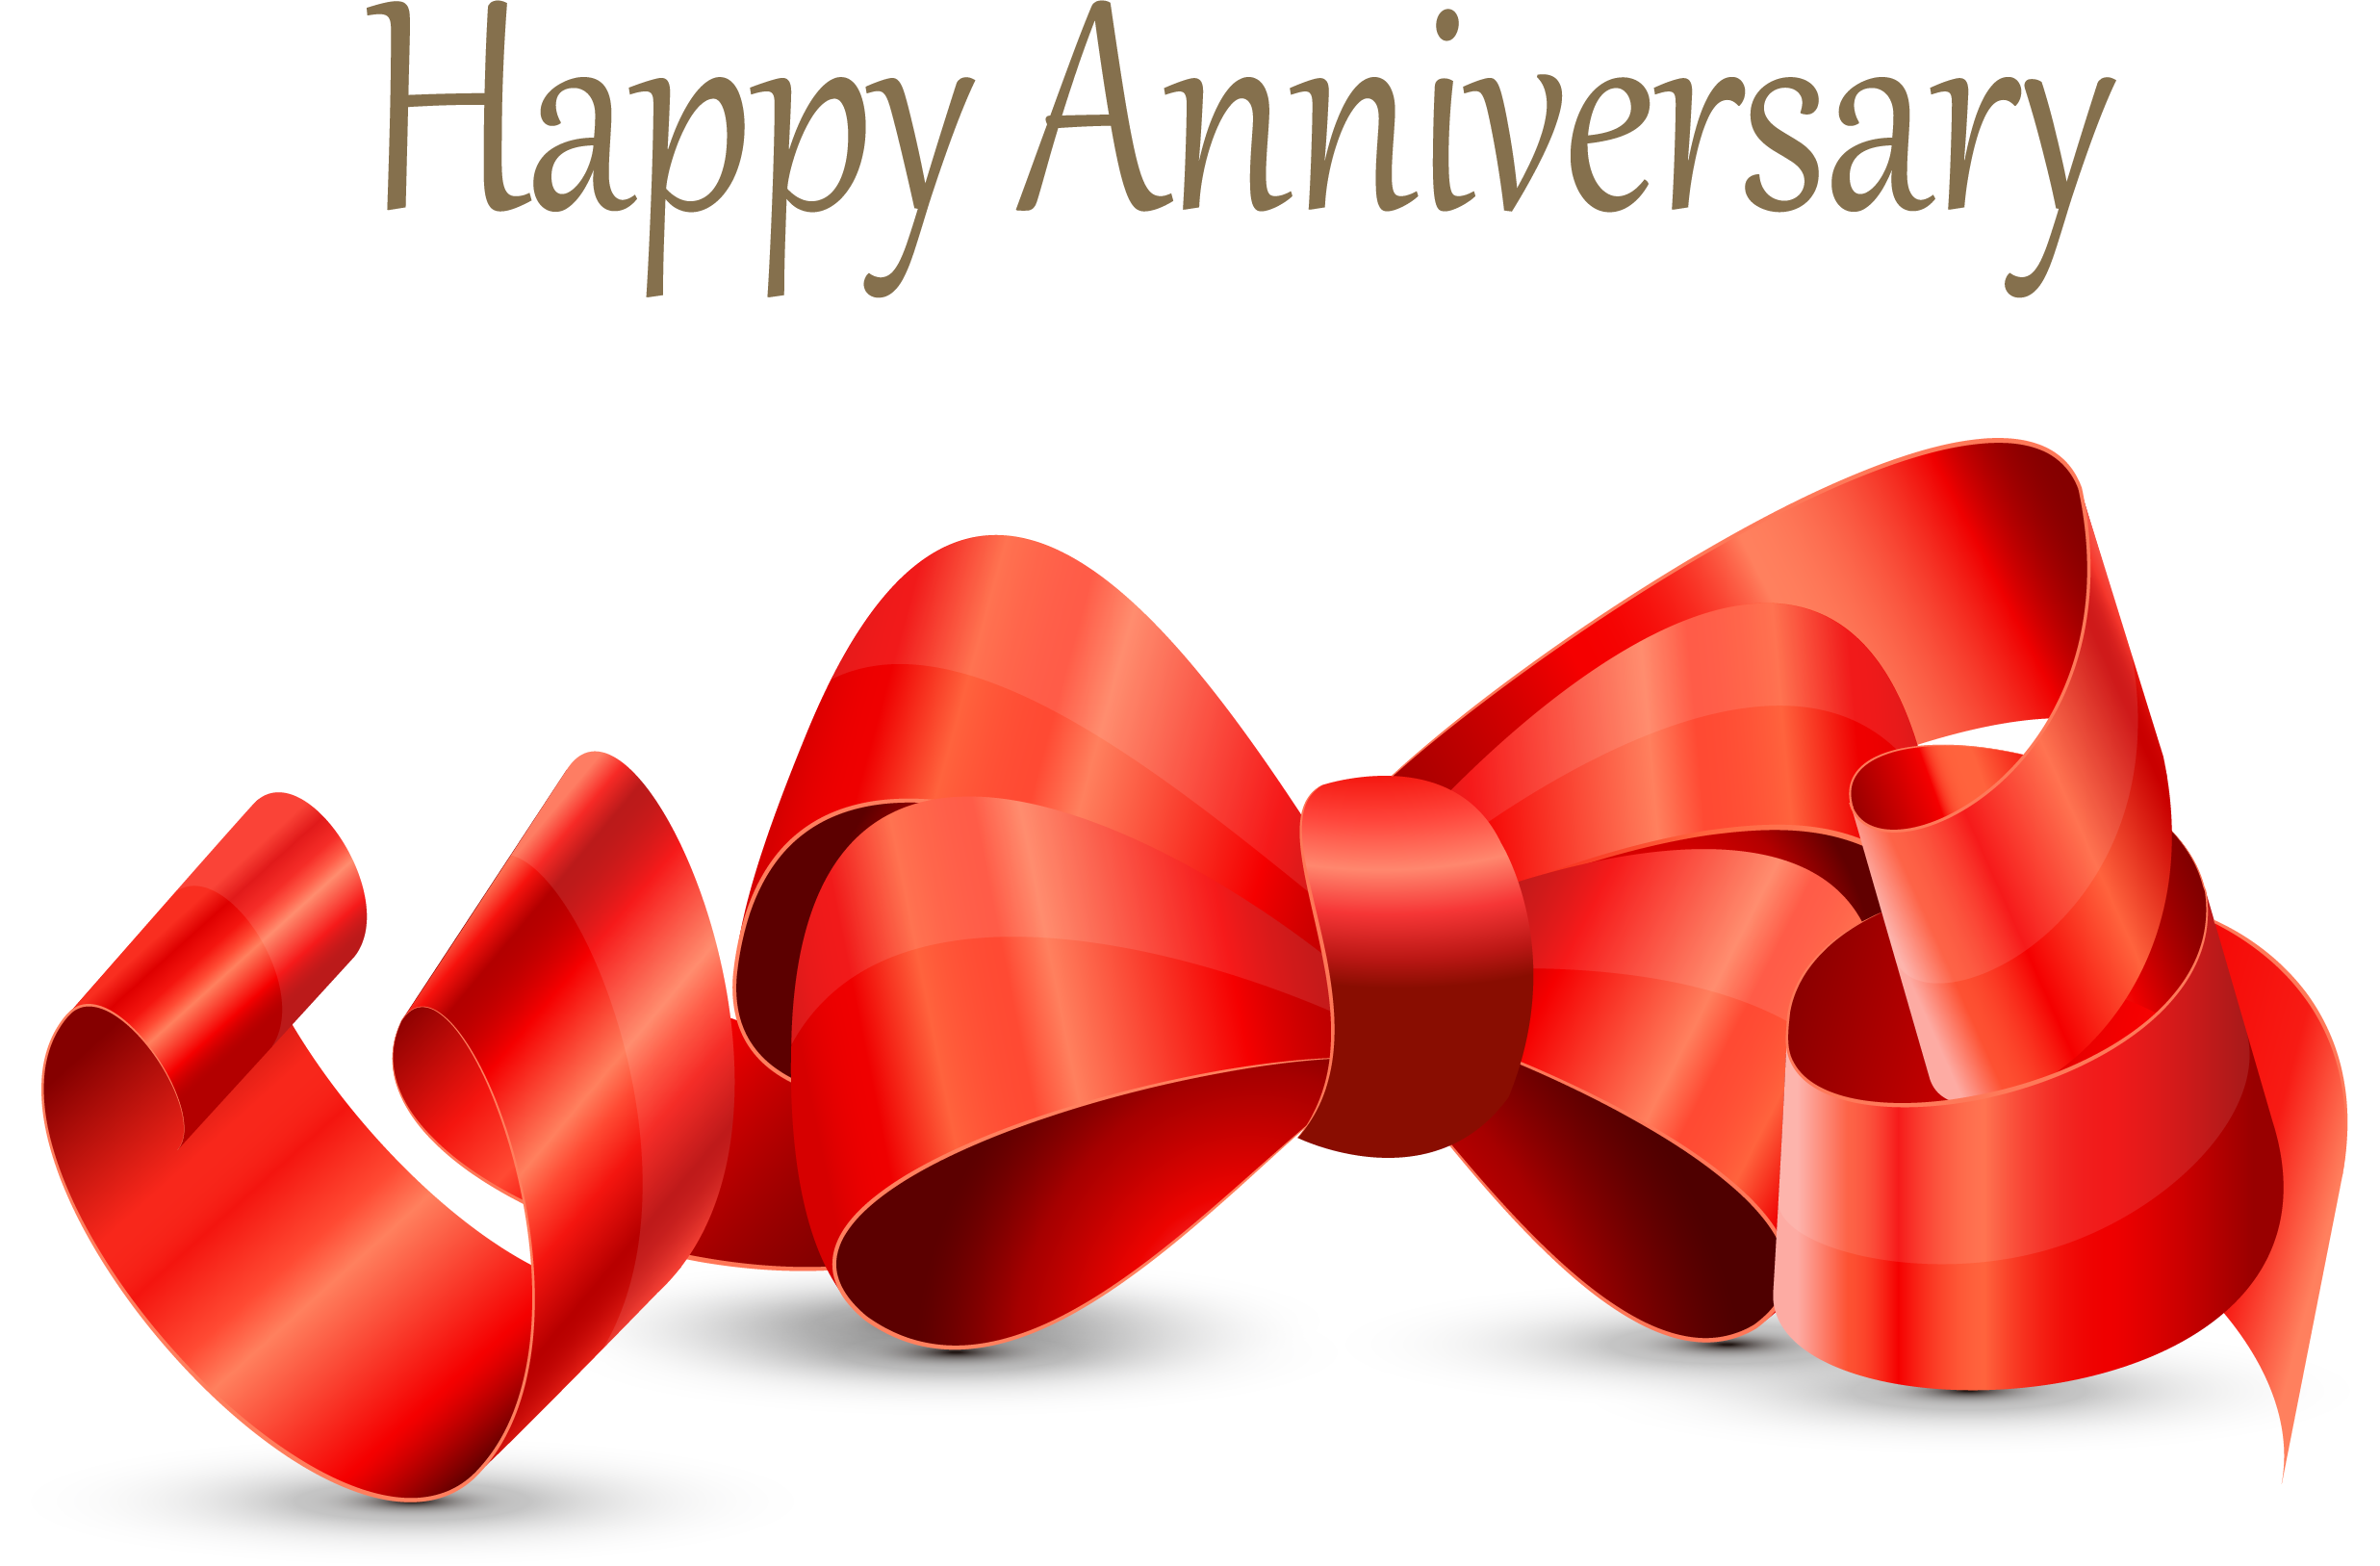 Heart Product Anniversary Happiness Wedding Download HQ PNG PNG Image